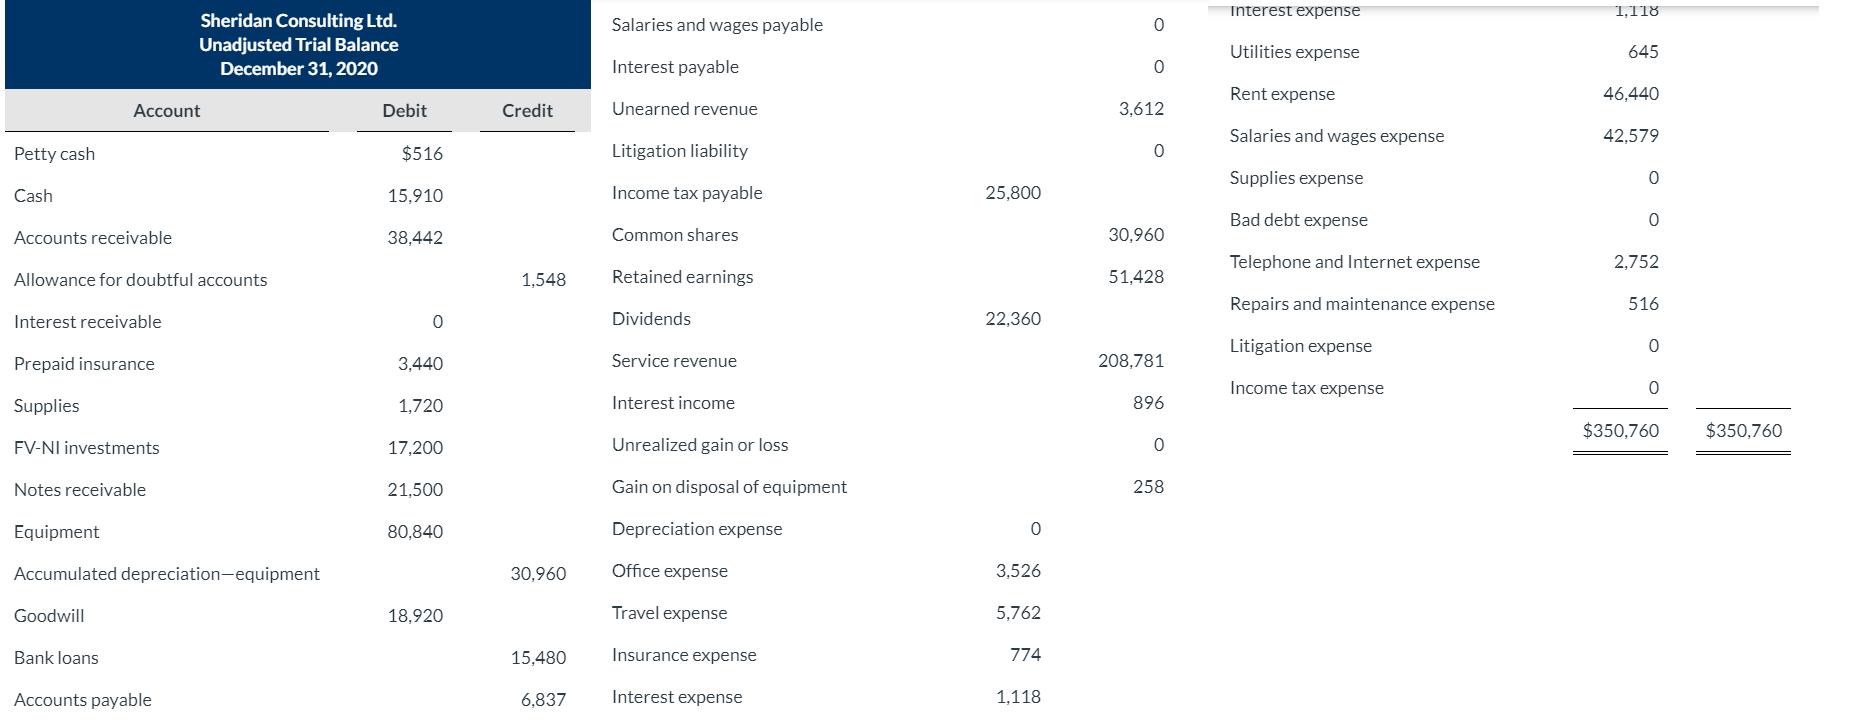 Interest expense1,118Salaries and wages payable0Sheridan Consulting Ltd.Unadjusted Trial BalanceDecember 31, 2020Utili